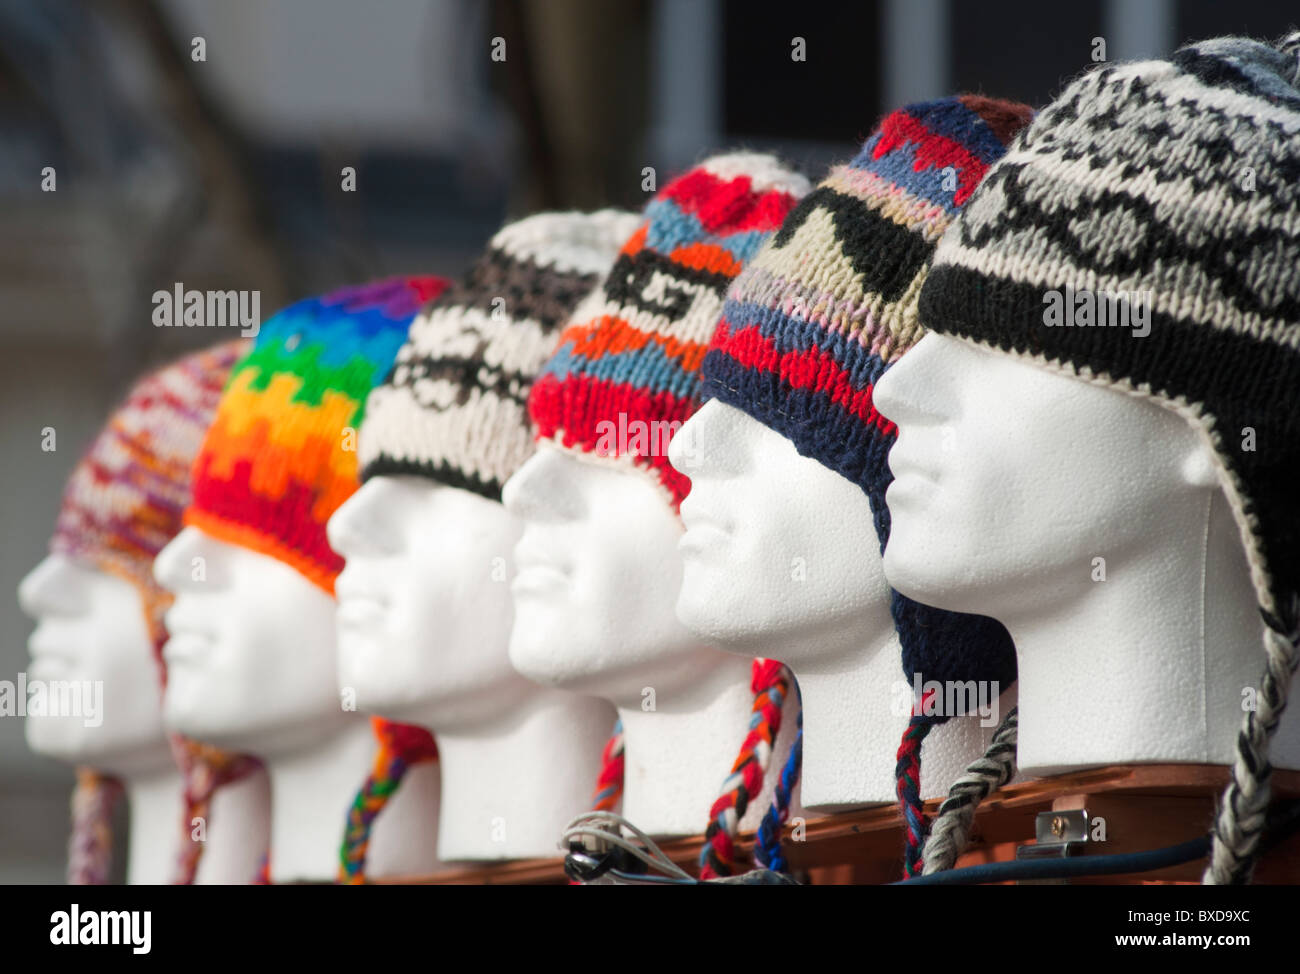 Colourful woolly hats for sale in Worcester's high st on a cold winter's day. England December 2010. Stock Photo